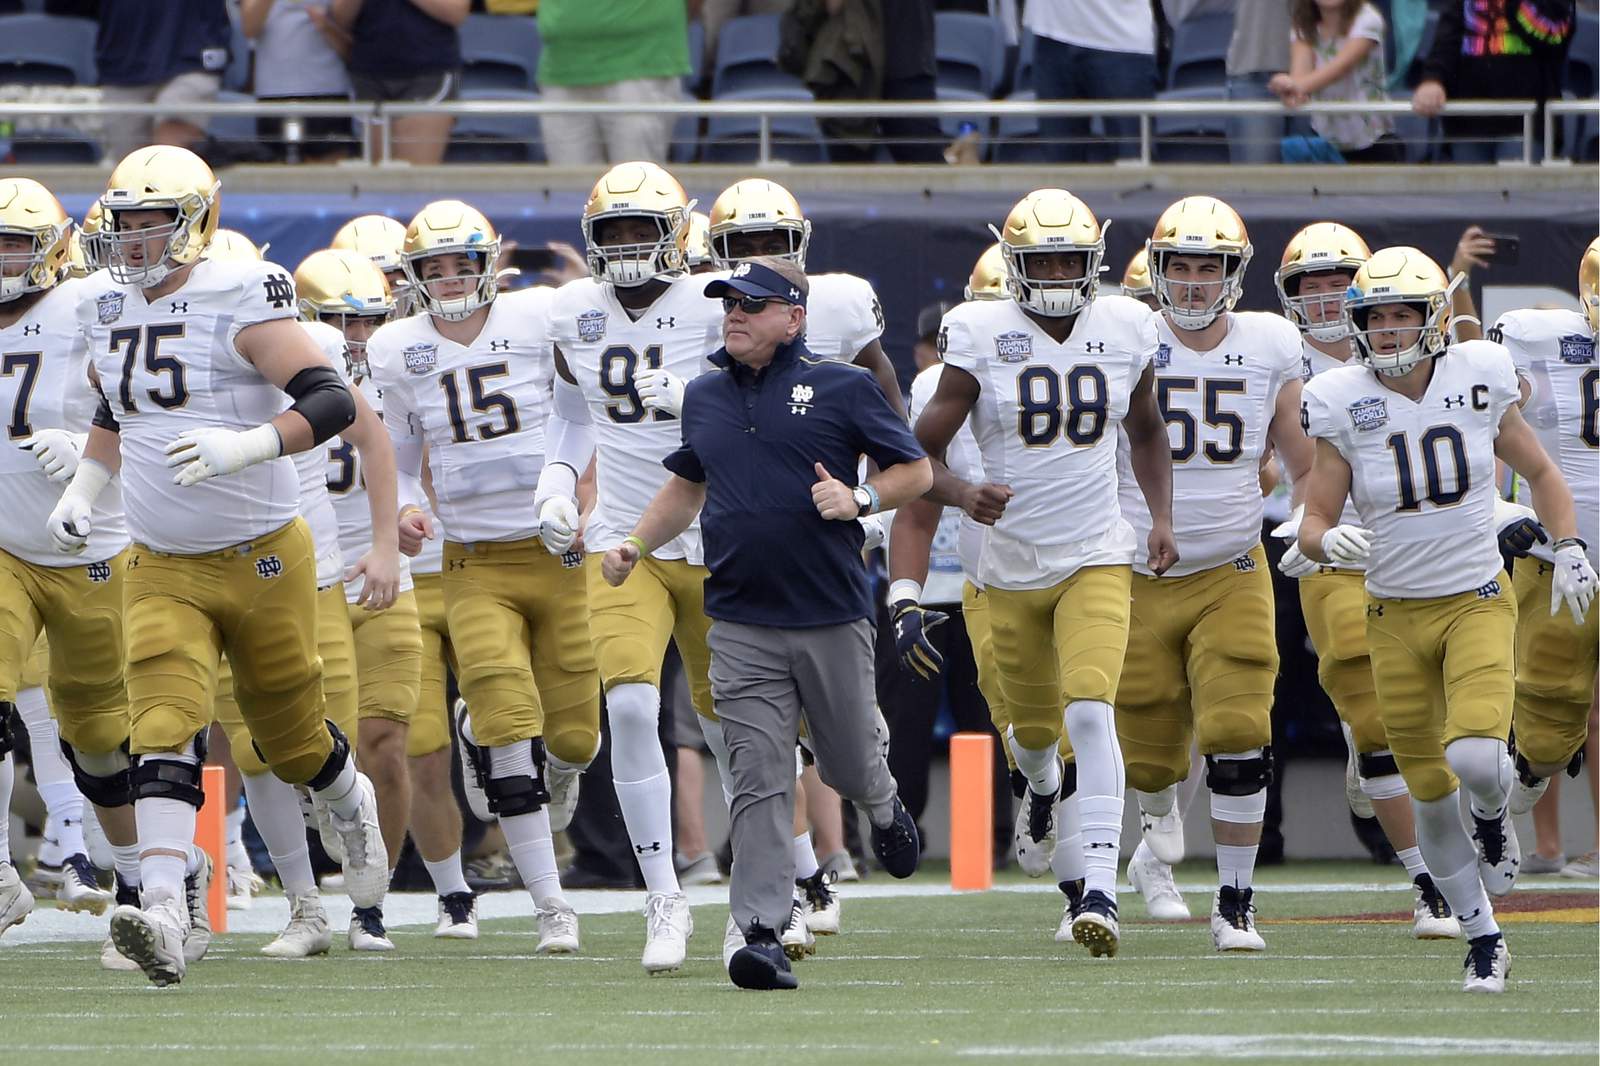 Notre Dame opens ACC play against Duke, won't play Navy